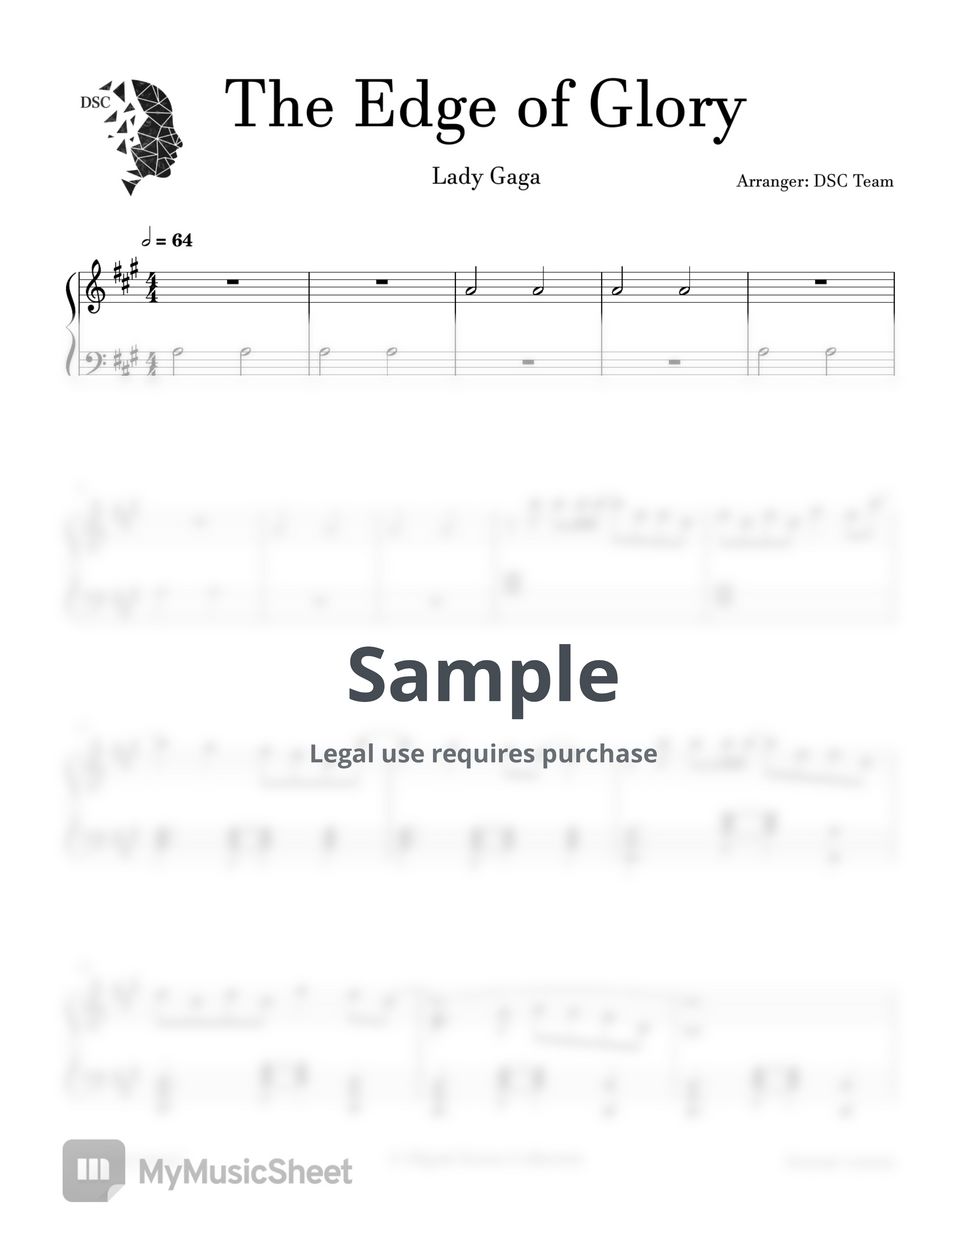 Lady Gaga - The Edge of Glory by Digital Scores Collection